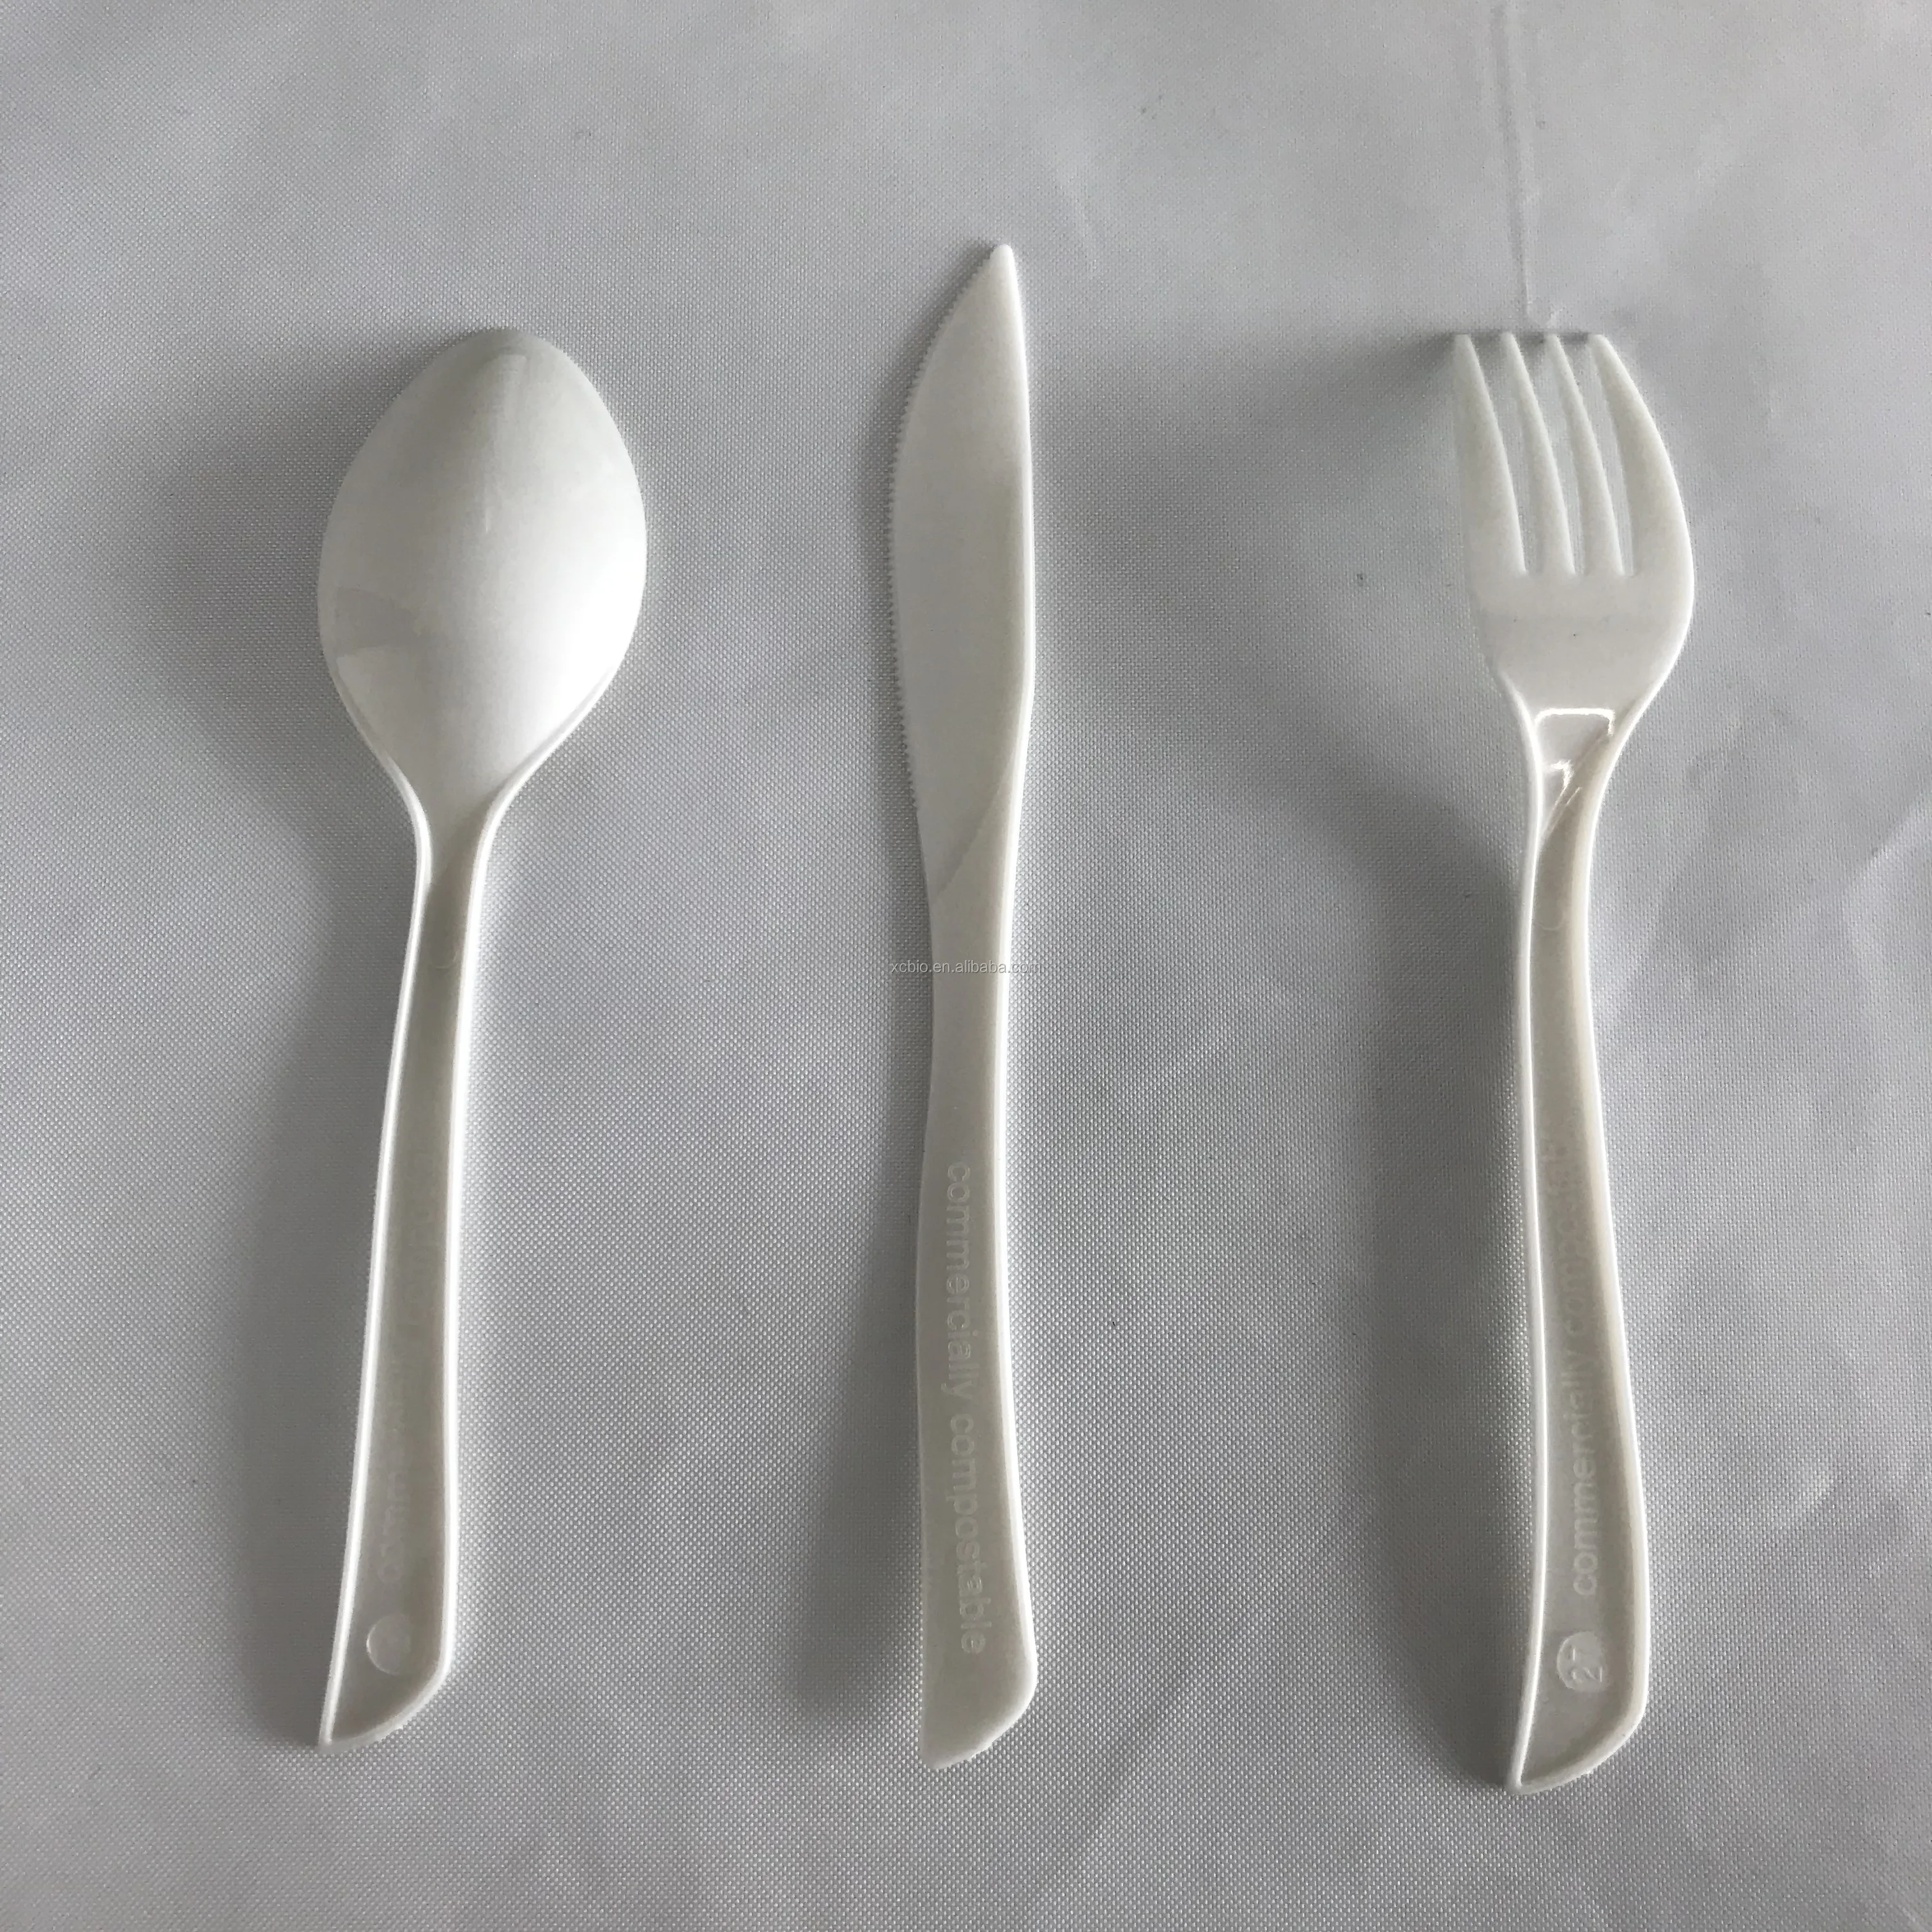 CPLA Material Made Biodegradable Kitchen Cutlery Set